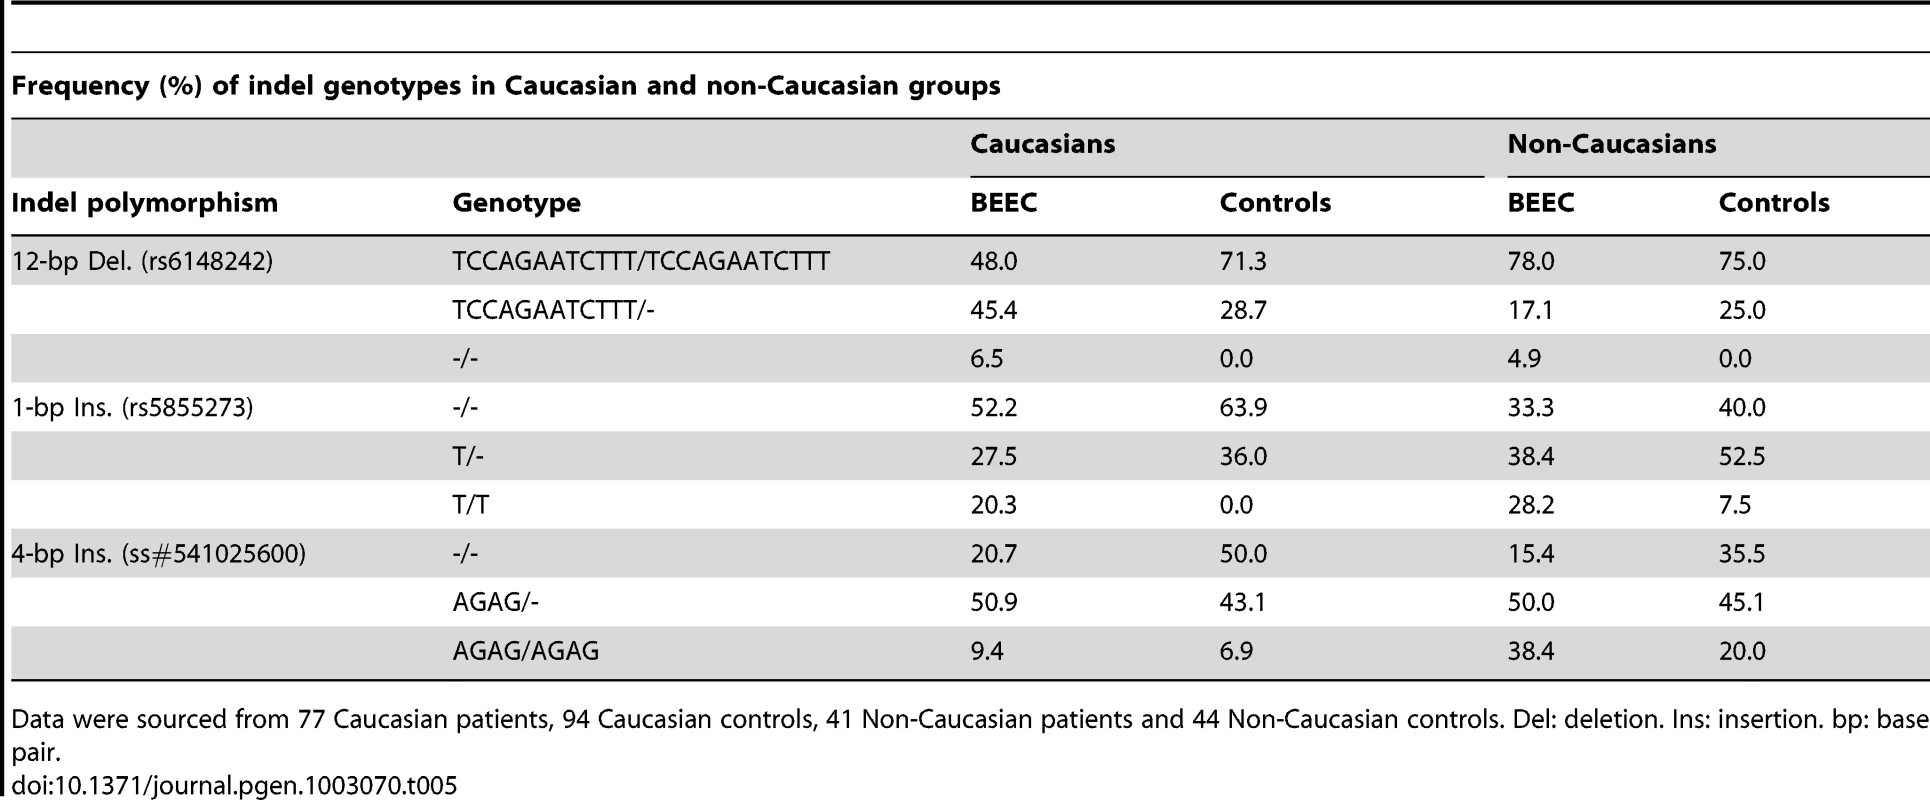 Frequency (%) of indel genotypes in Caucasian and non-Caucasian groups.